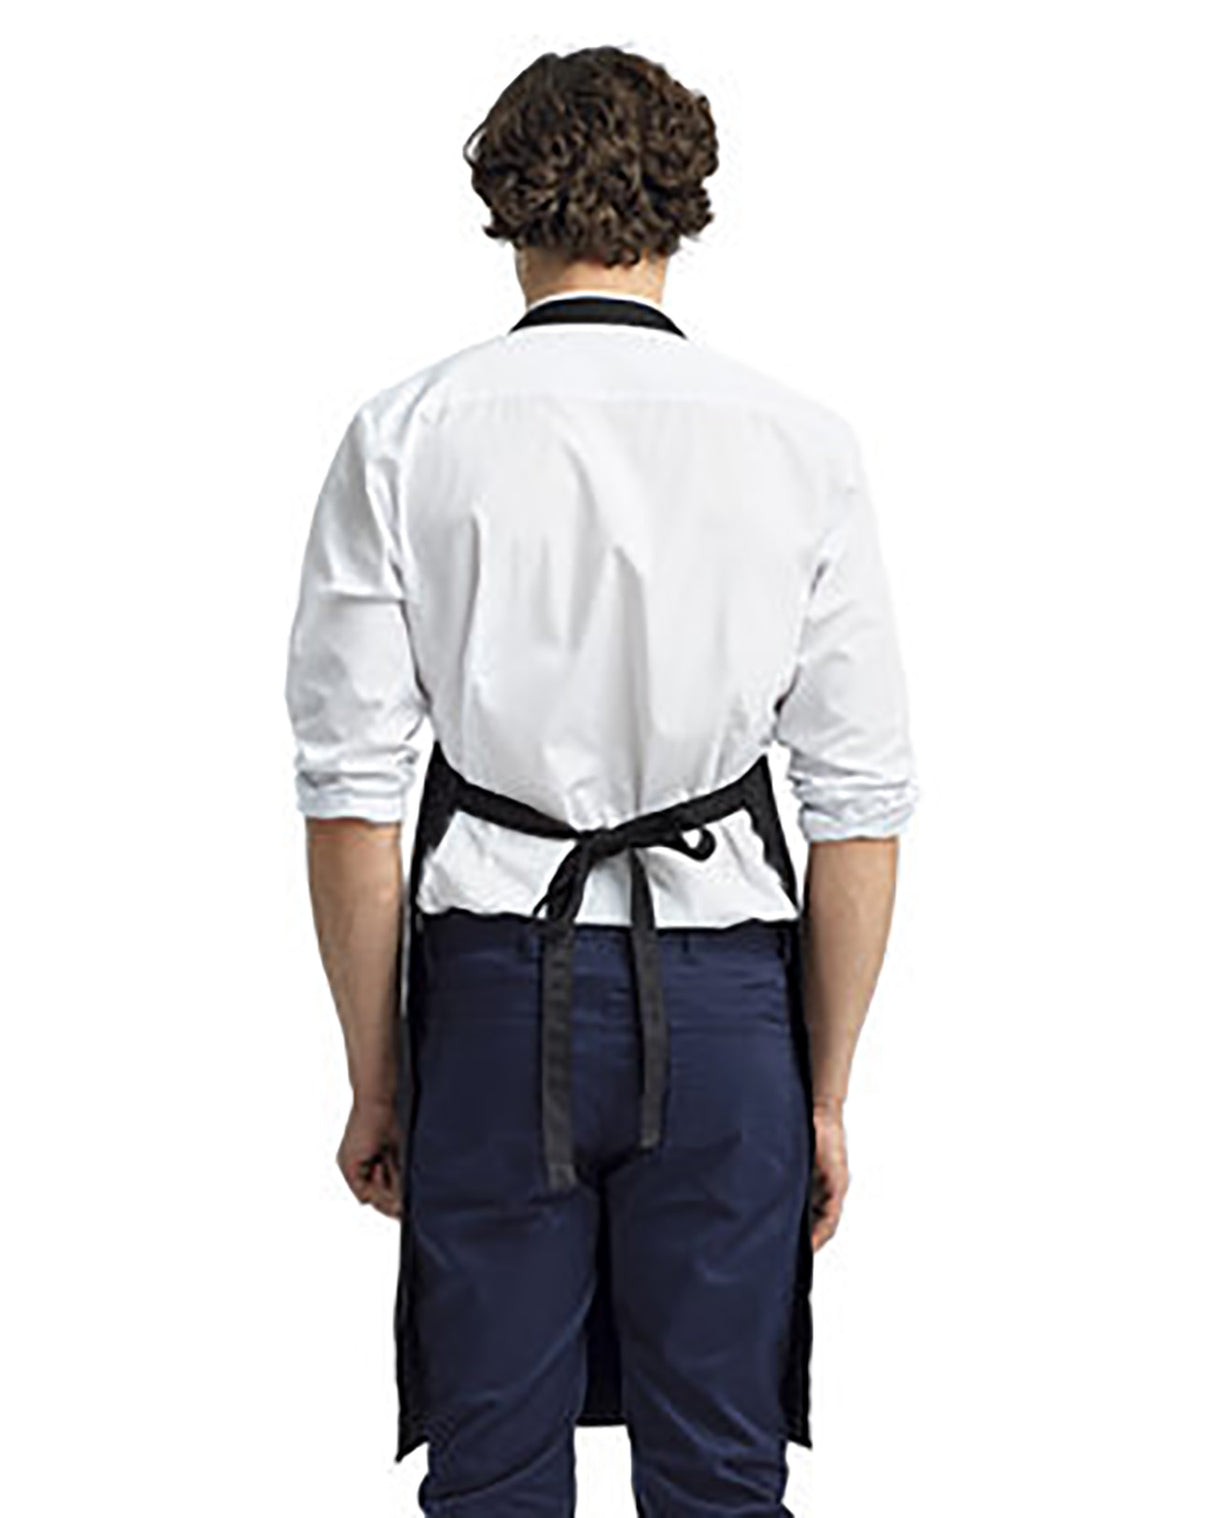 Apron - Certified Angus Clean Apron